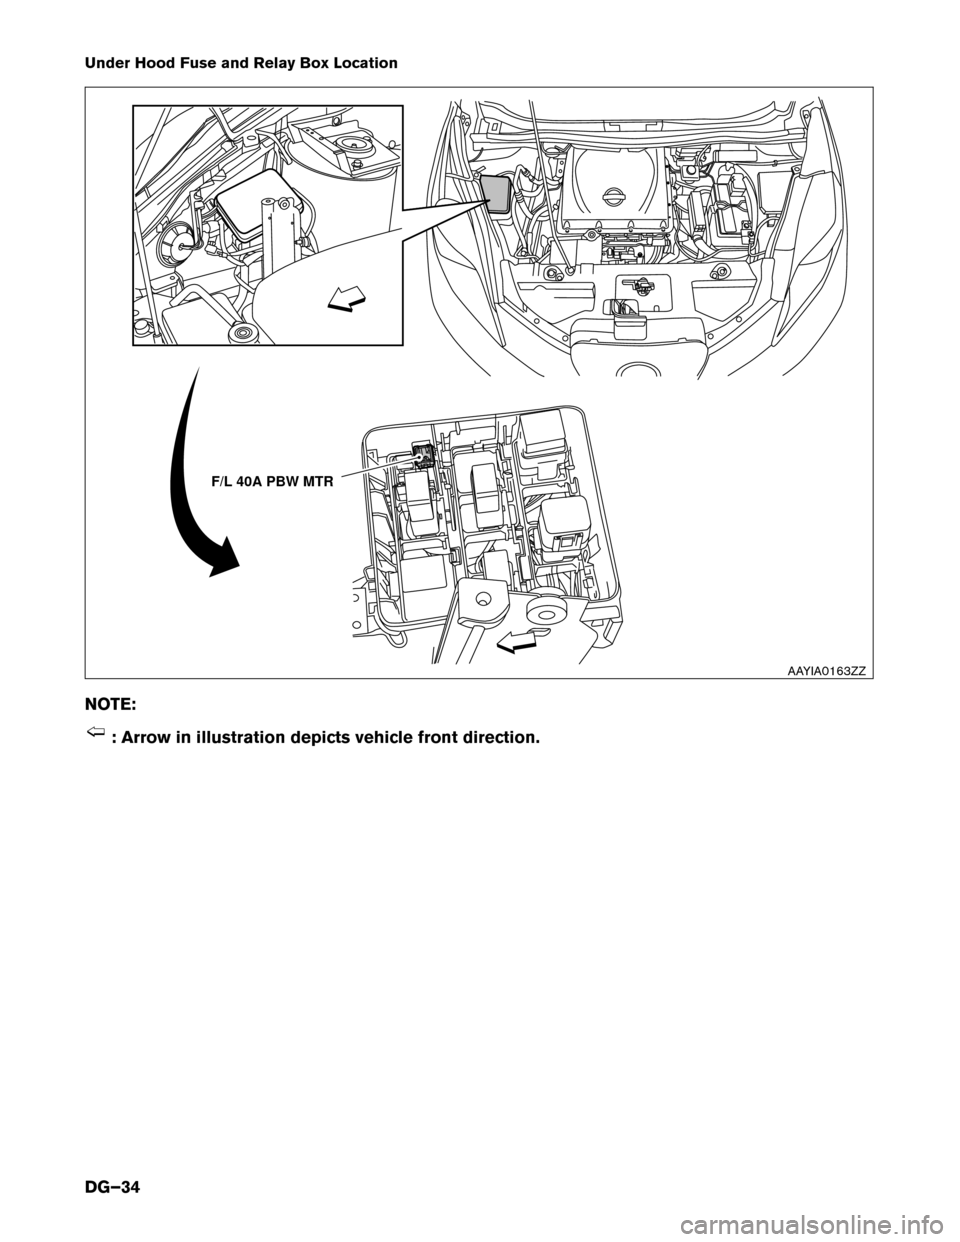 NISSAN LEAF 2015 1.G Dismantling Guide Under Hood Fuse and Relay Box Location
NO
TE: : Arrow in illustration depicts vehicle front direction. F/L 40A PBW MTR
AAYIA0163ZZ
DG–34 